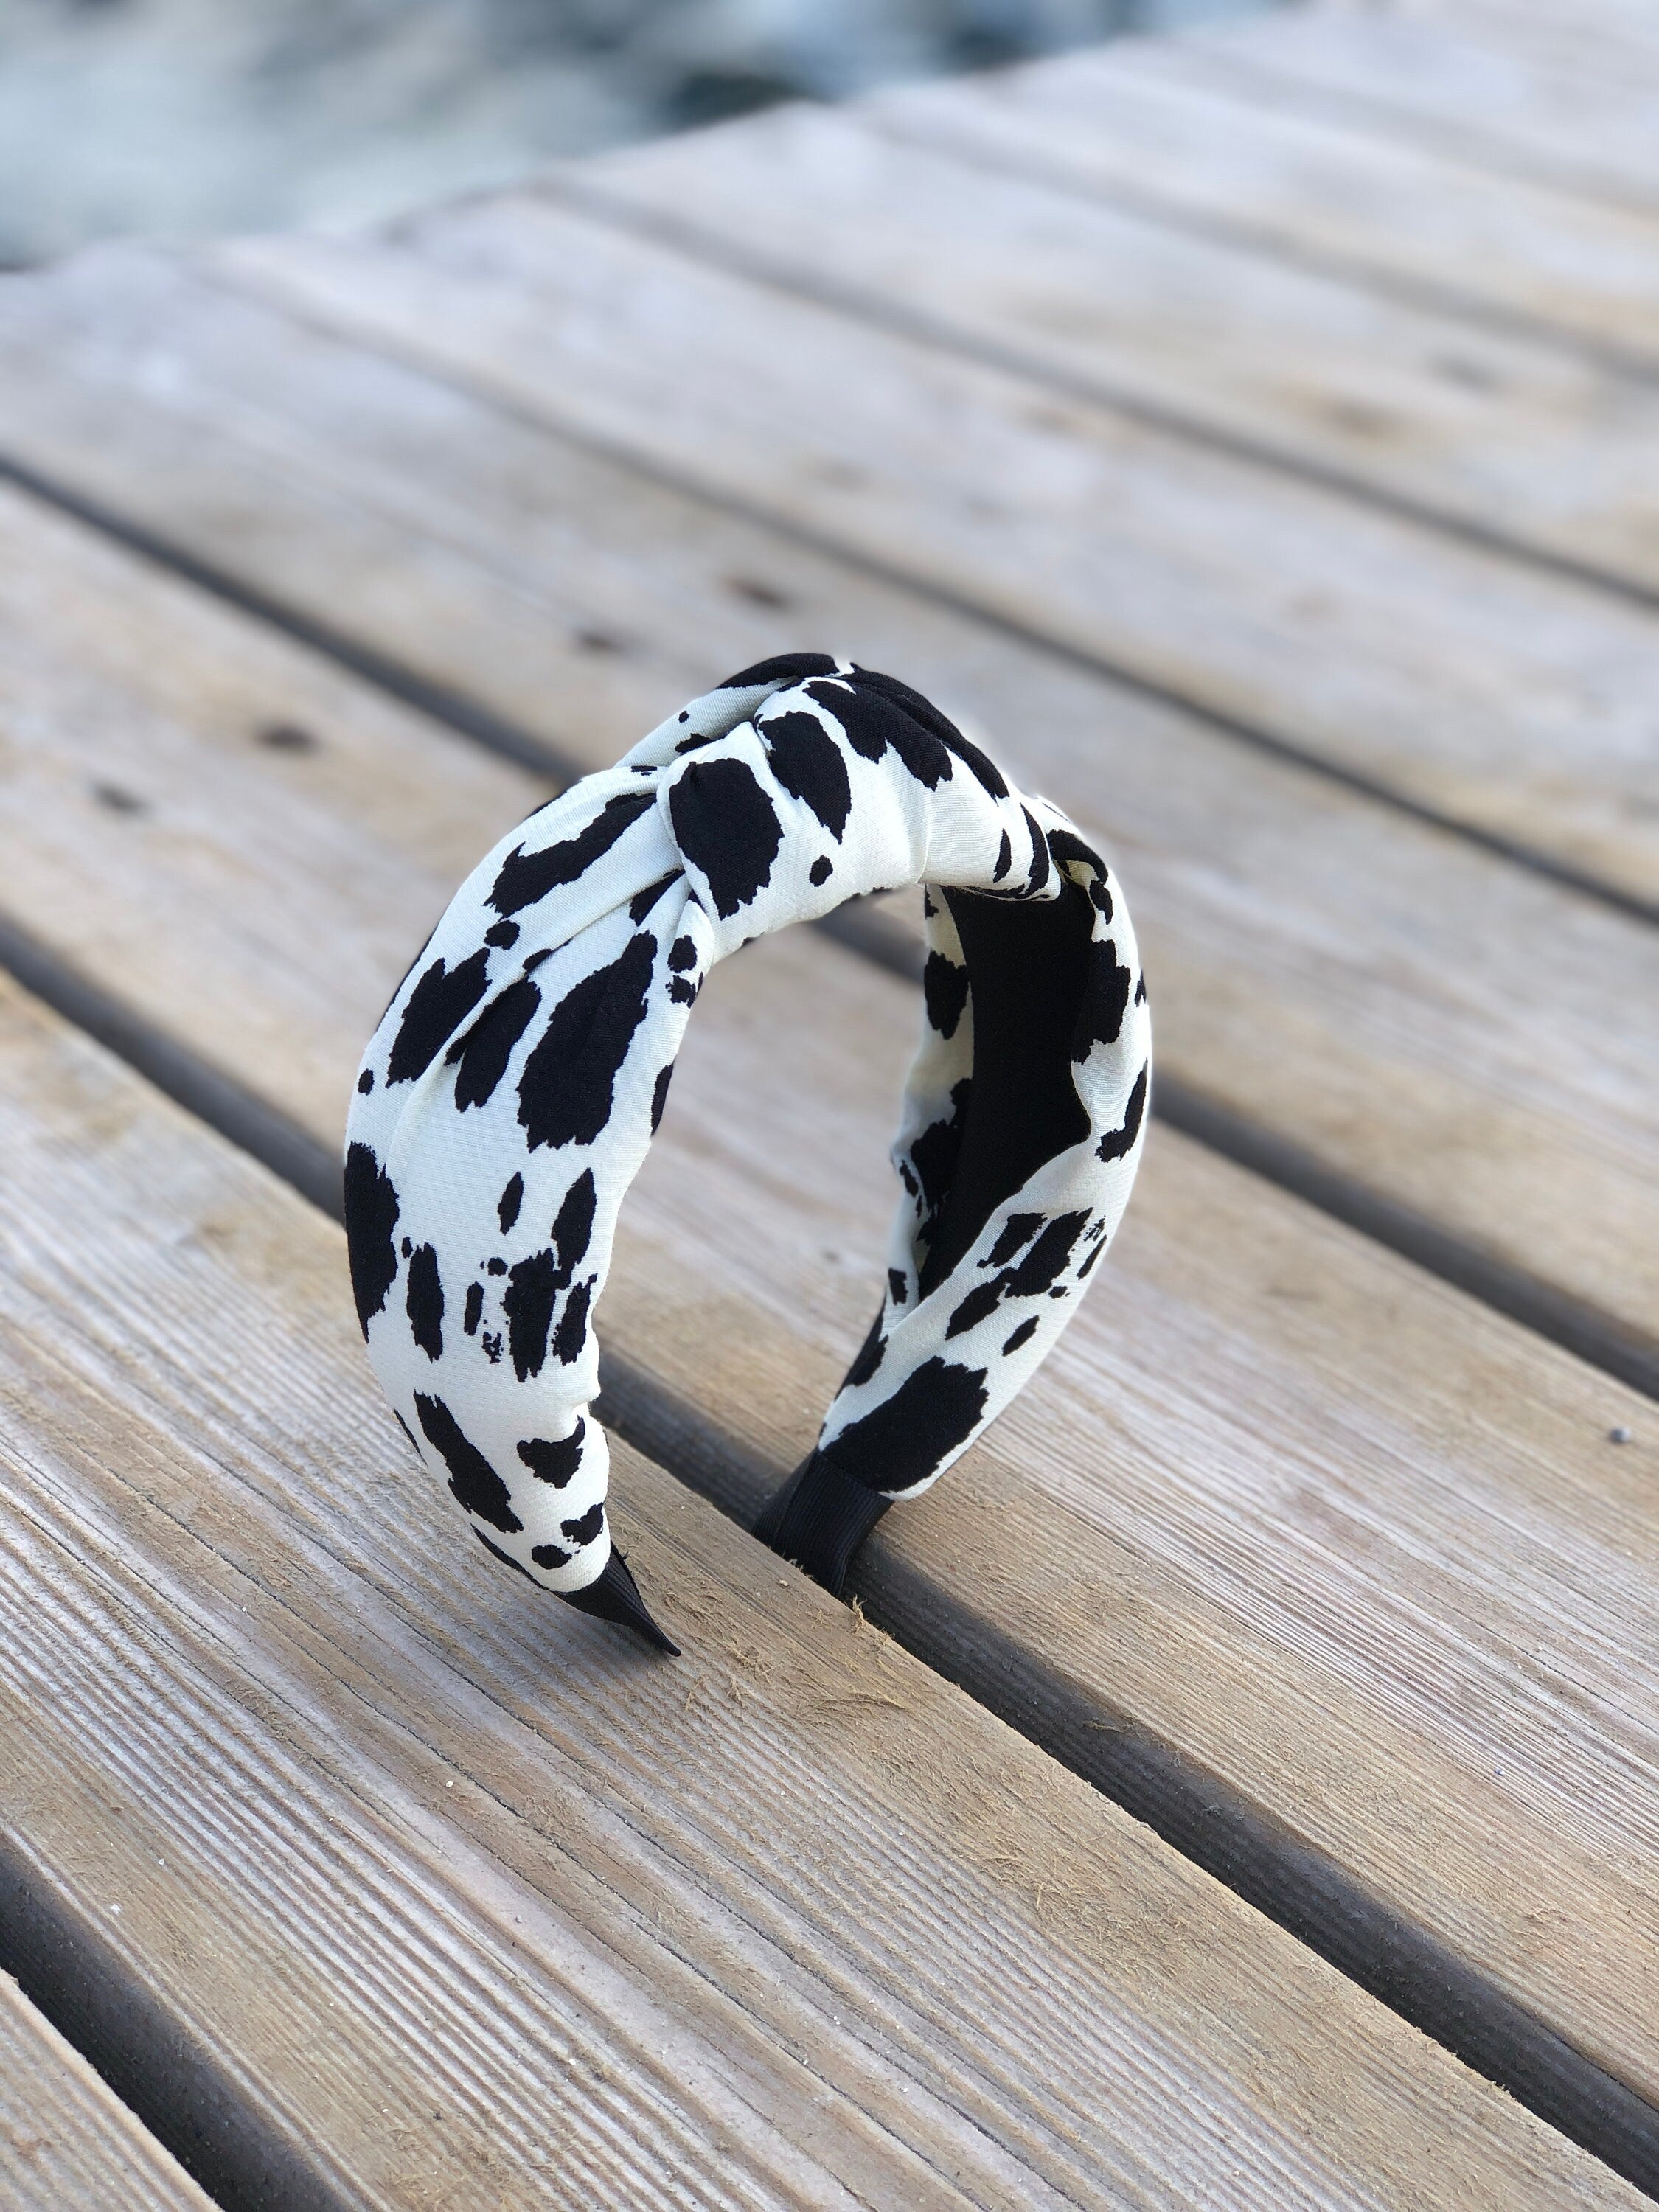 Stay on-trend with this must-have African cotton headband, designed in a stylish white and black leopard print and finished with a bow.